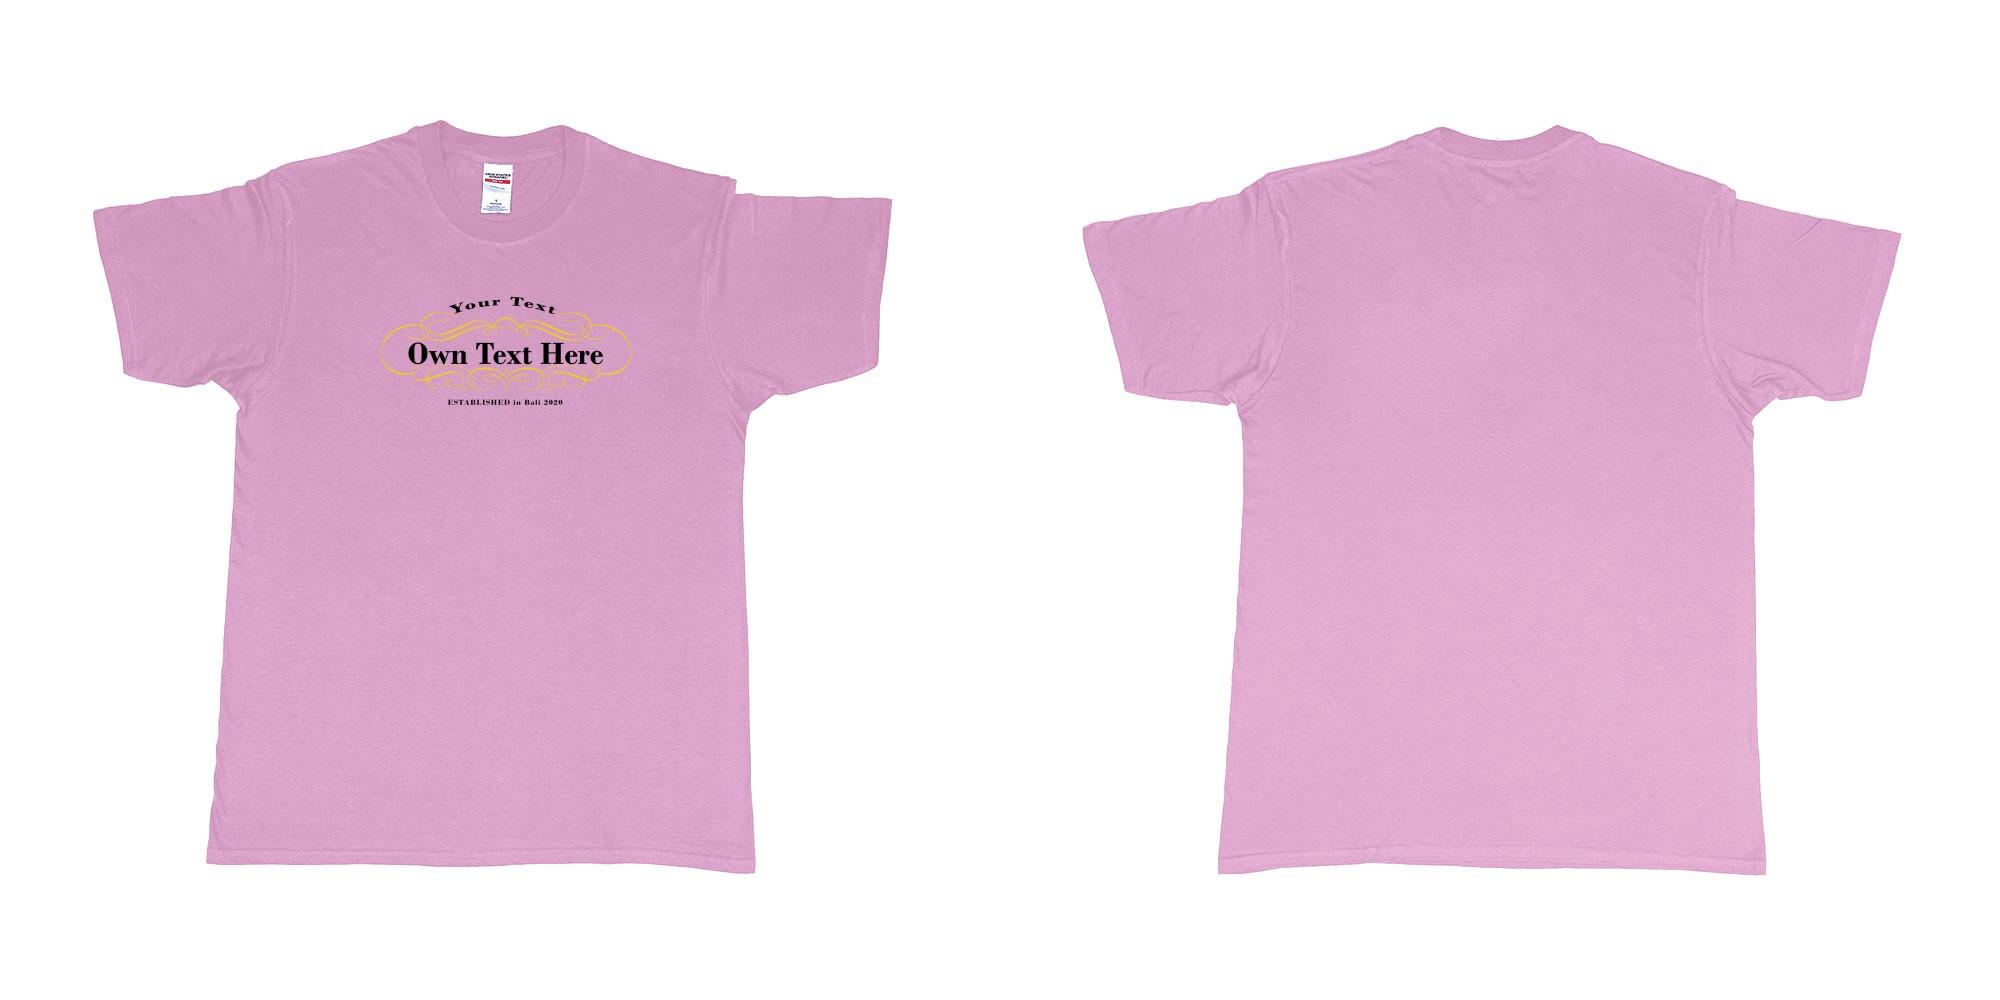 Custom tshirt design Laurent perrier in fabric color light-pink choice your own text made in Bali by The Pirate Way